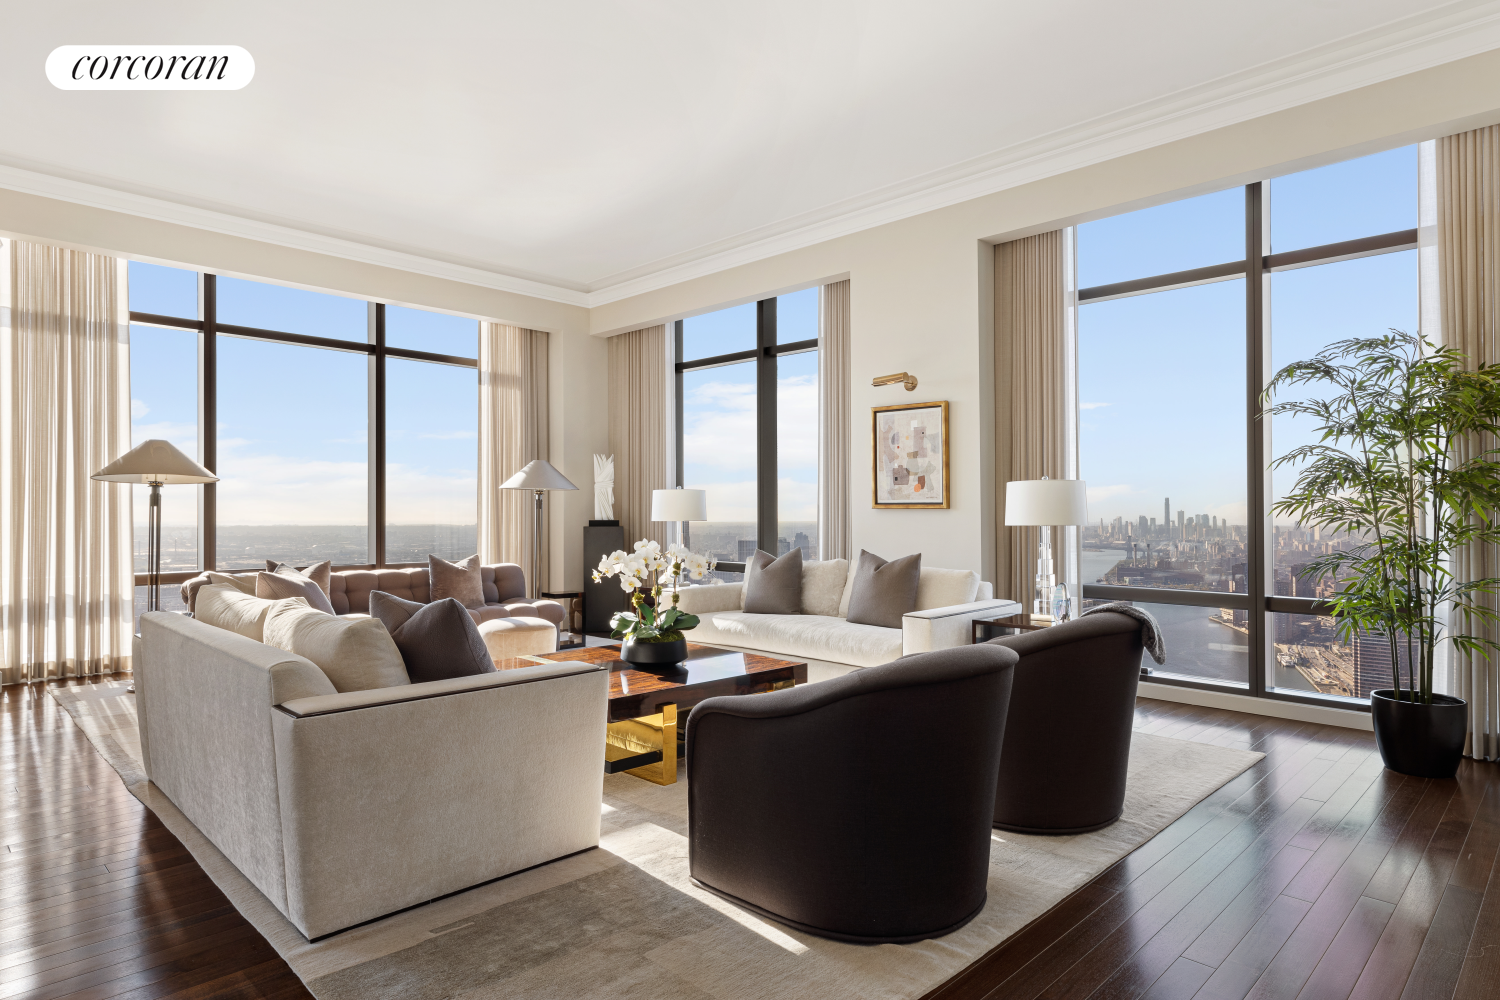 845 United Nations Plaza 75B, Turtle Bay, Midtown East, NYC - 3 Bedrooms  
3.5 Bathrooms  
6 Rooms - 